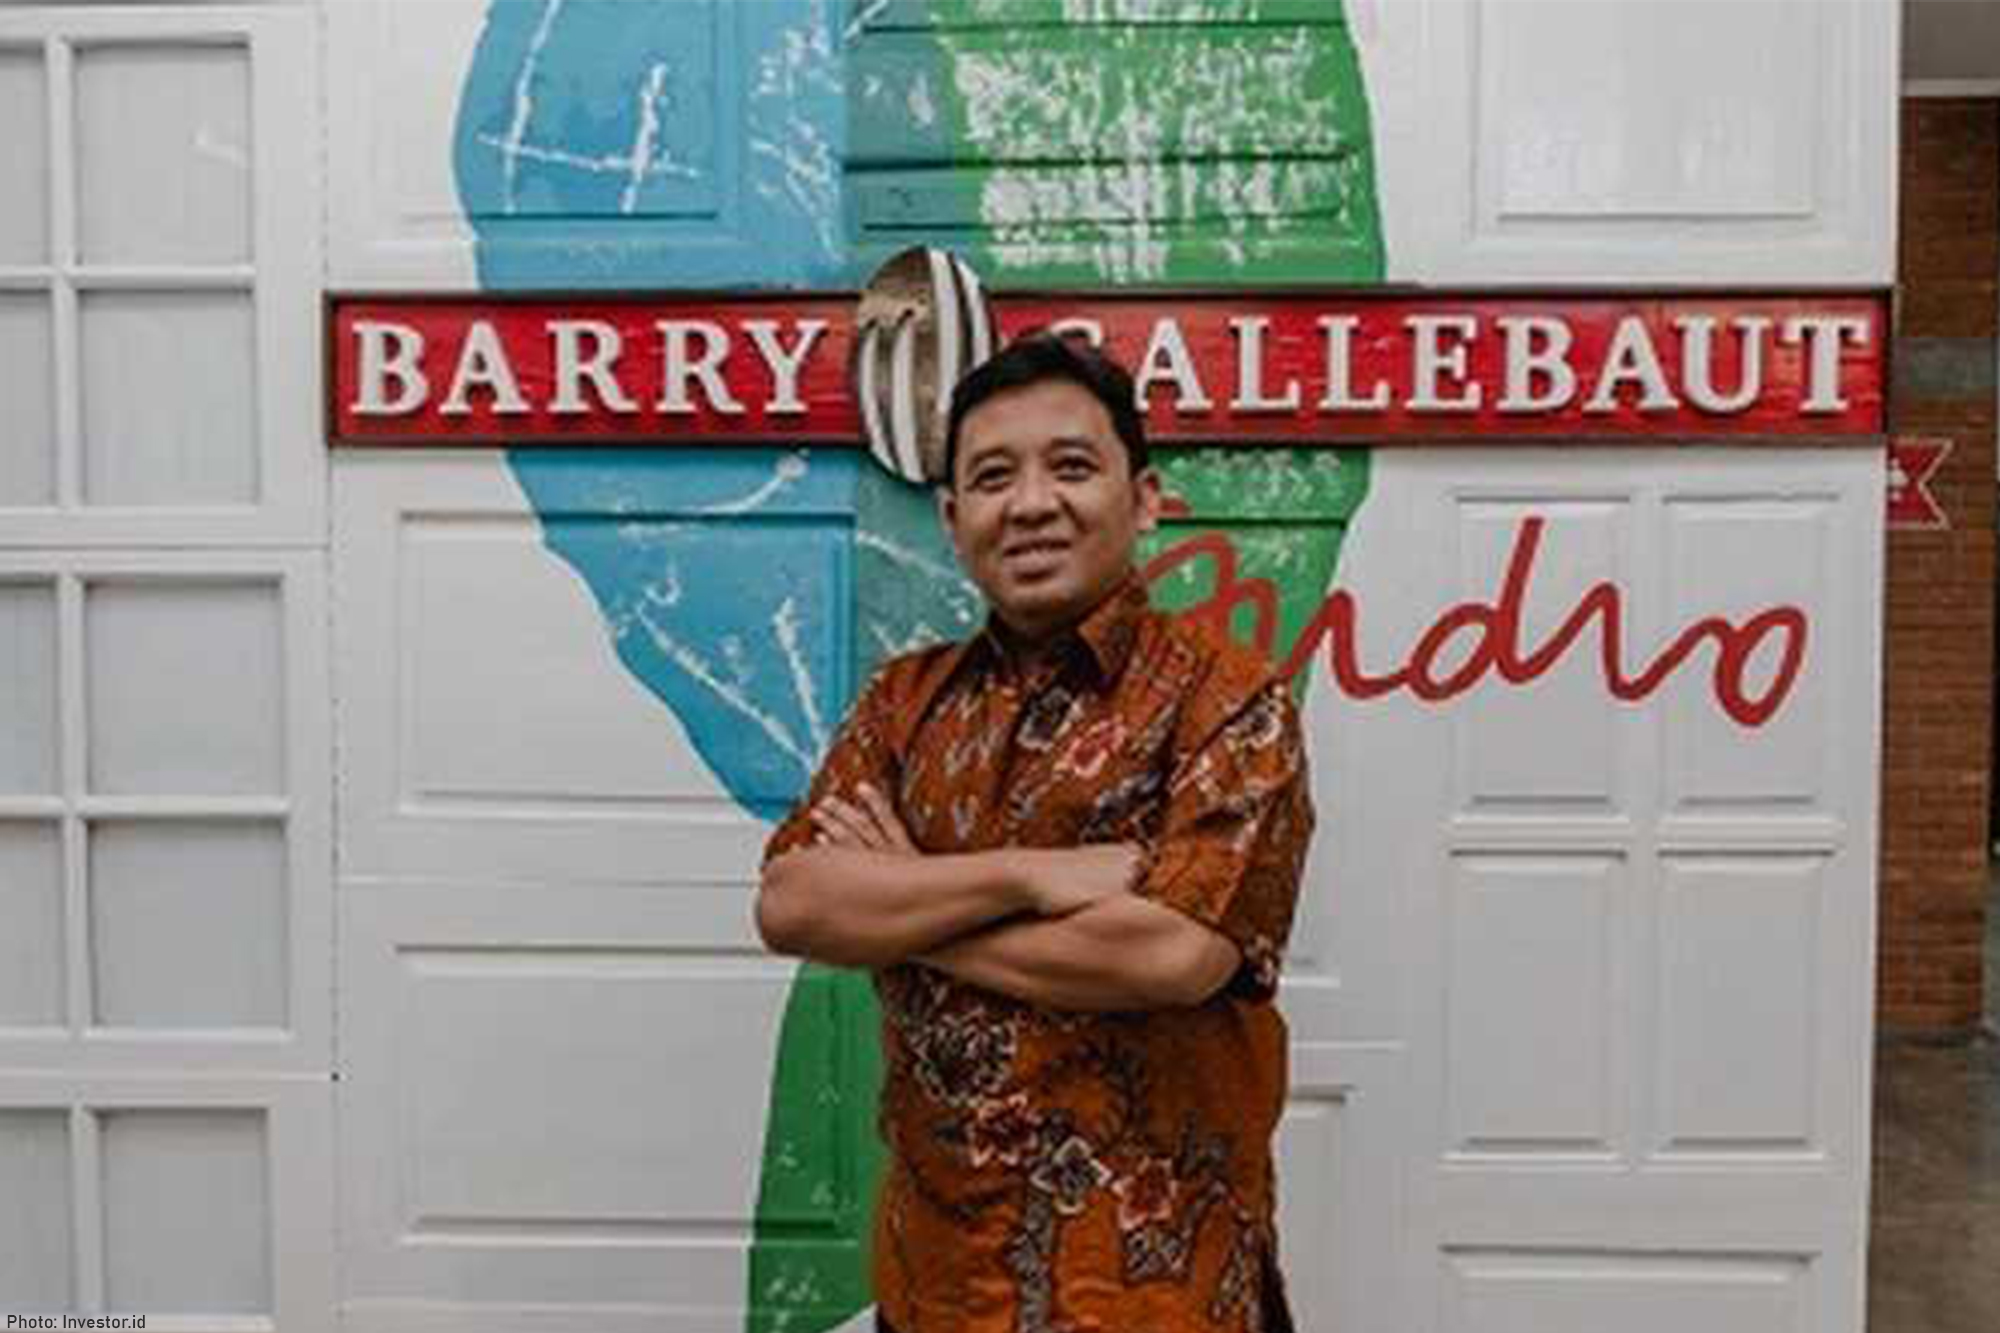 Barry Callebaut Optimistic Cocoa and Chocolate Market in Indonesia Has a Positive Trend